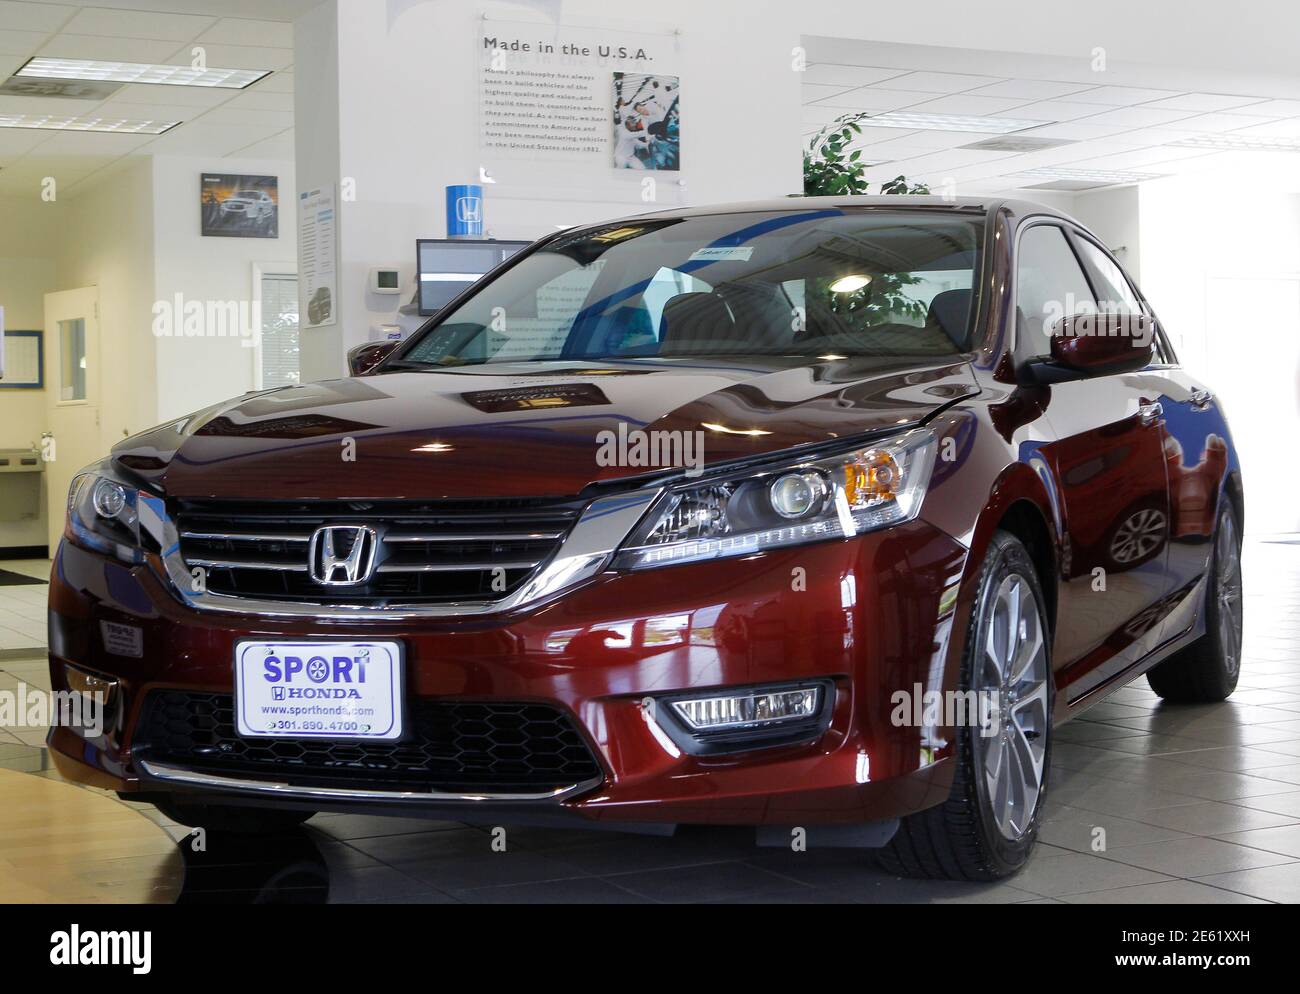 A new 2013 Honda Accord is shown on the sales floor at Sport Honda in  Silver Spring, Maryland September 17, 2012. The recovery of Detroit's  automakers is about to face its stiffest